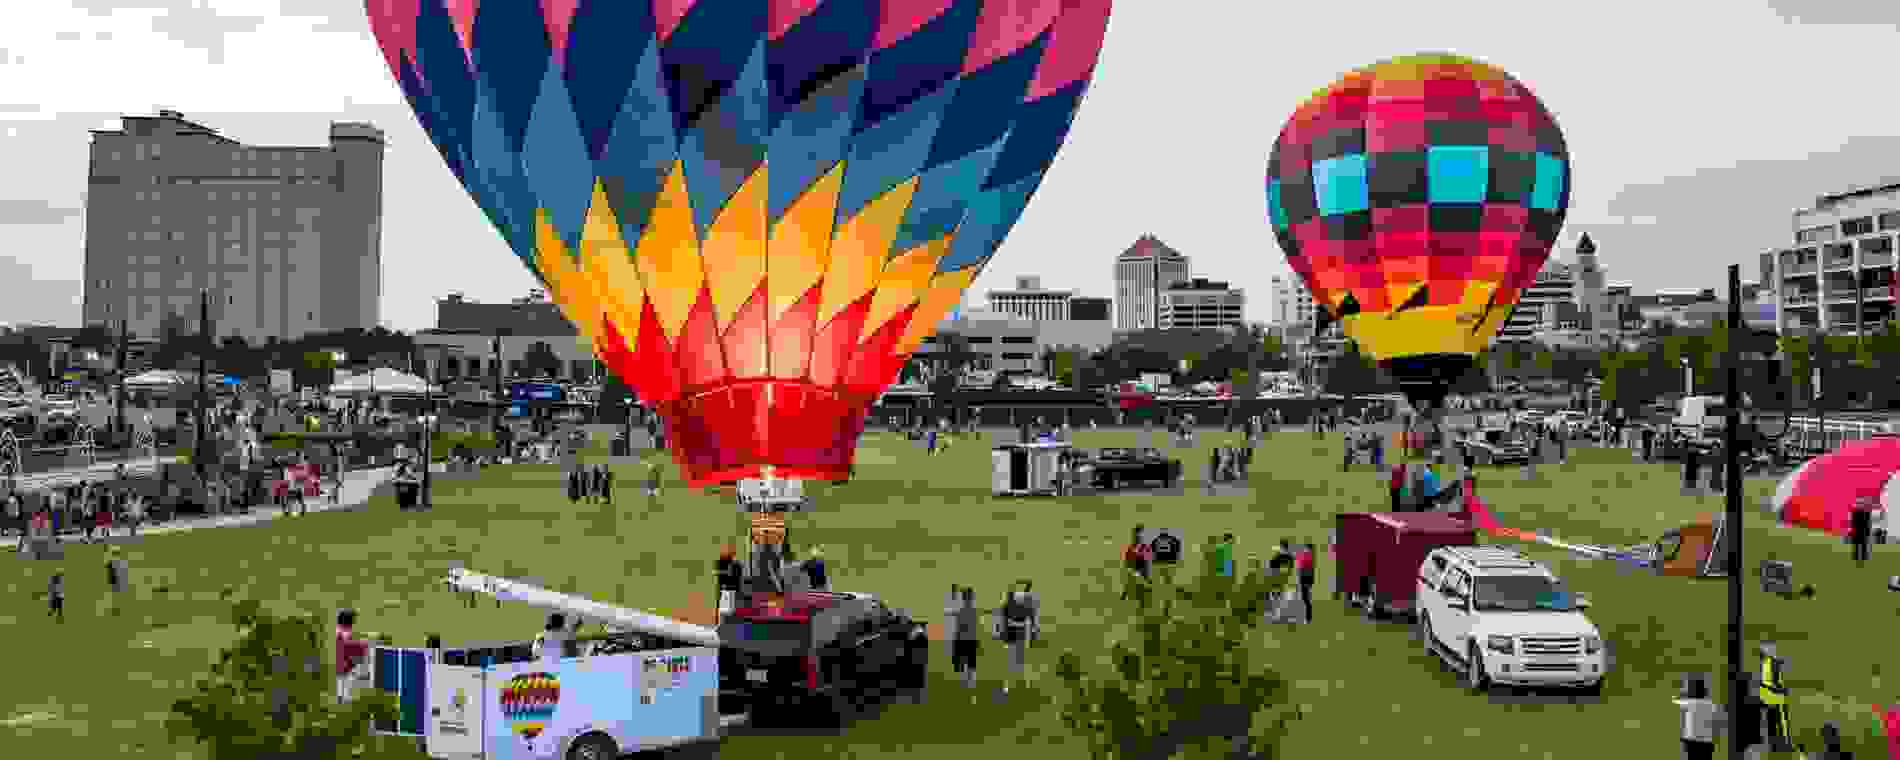 Wichita River Festival 2022 Schedule Of Events Astronomical Events 2022